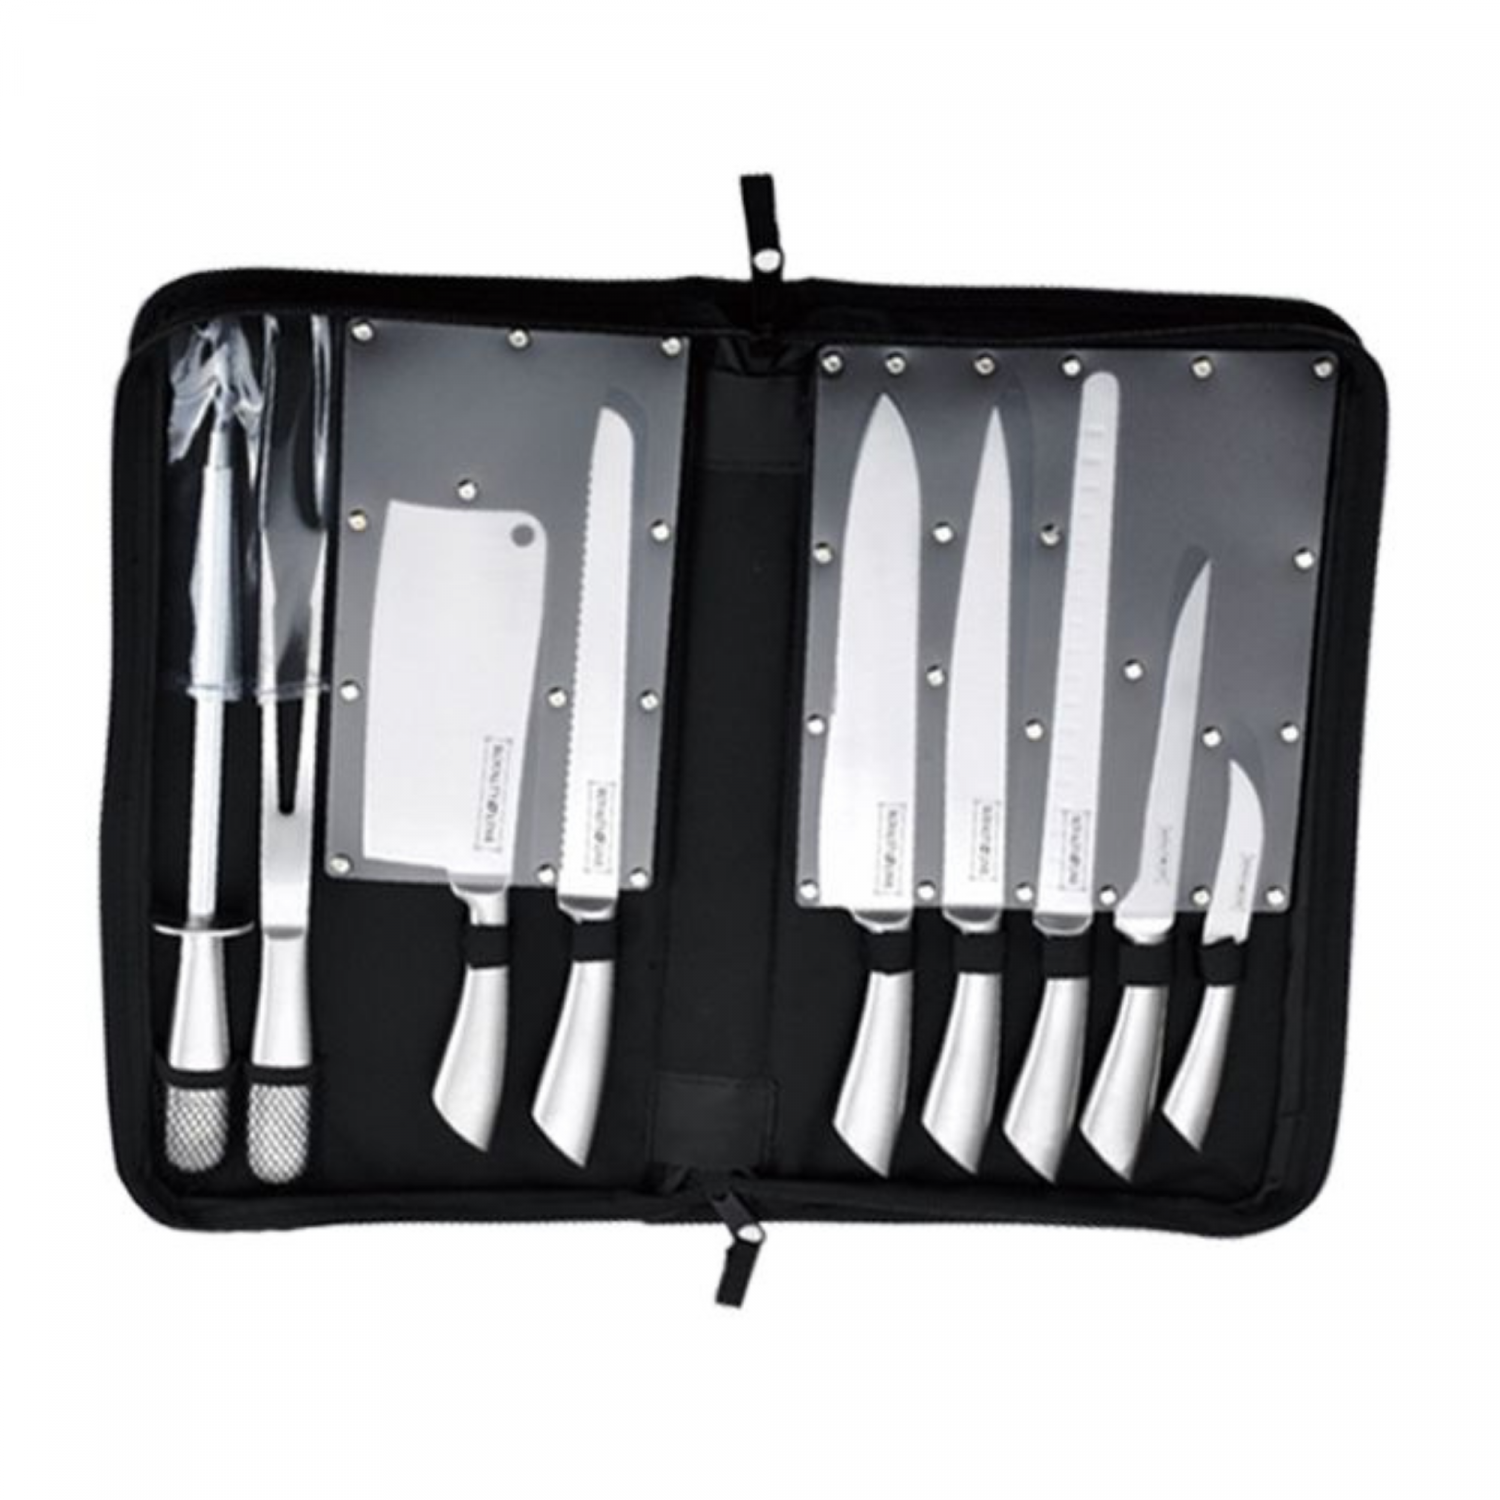 Dropship 12-piece Forged Kitchen Knife Set In White With Wood Storage  Block; to Sell Online at a Lower Price